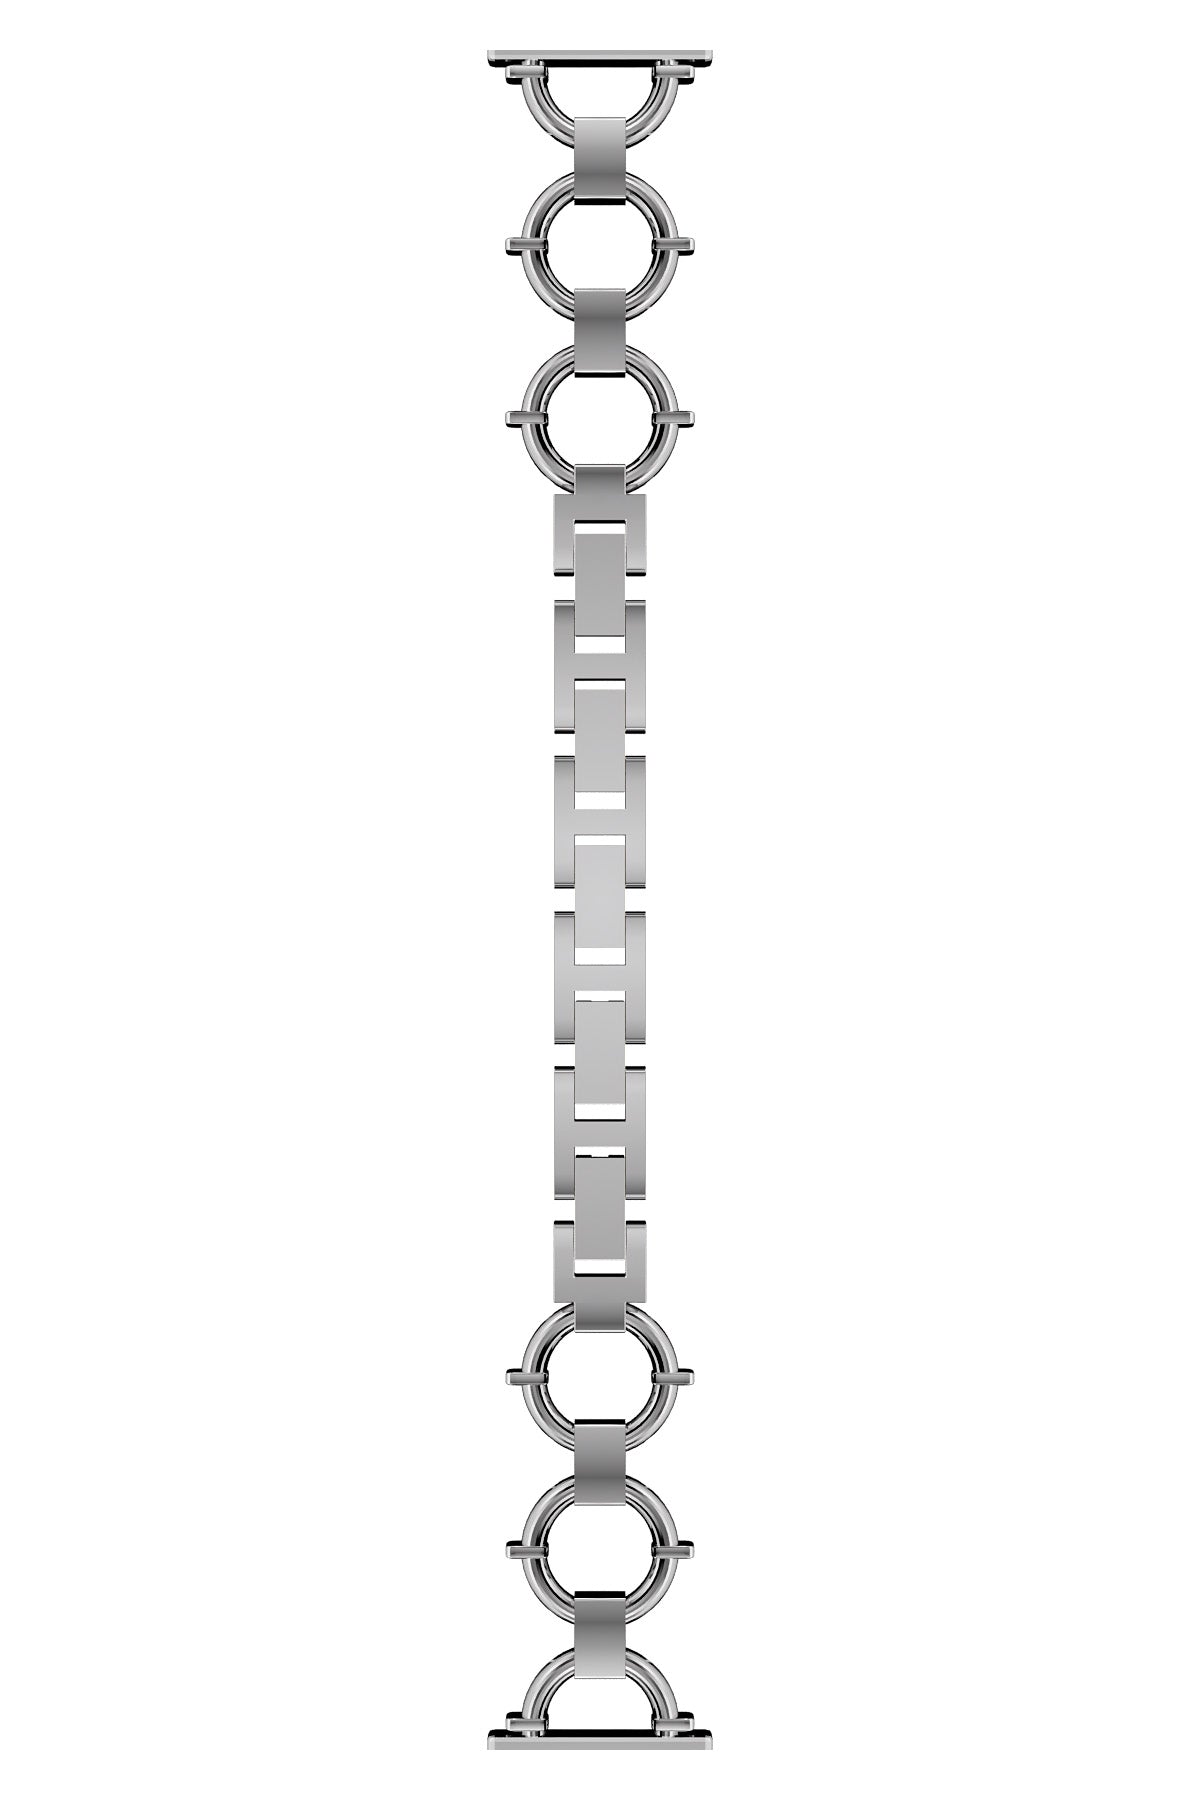 Apple Watch Compatible Chain Loop Band Light Gray 